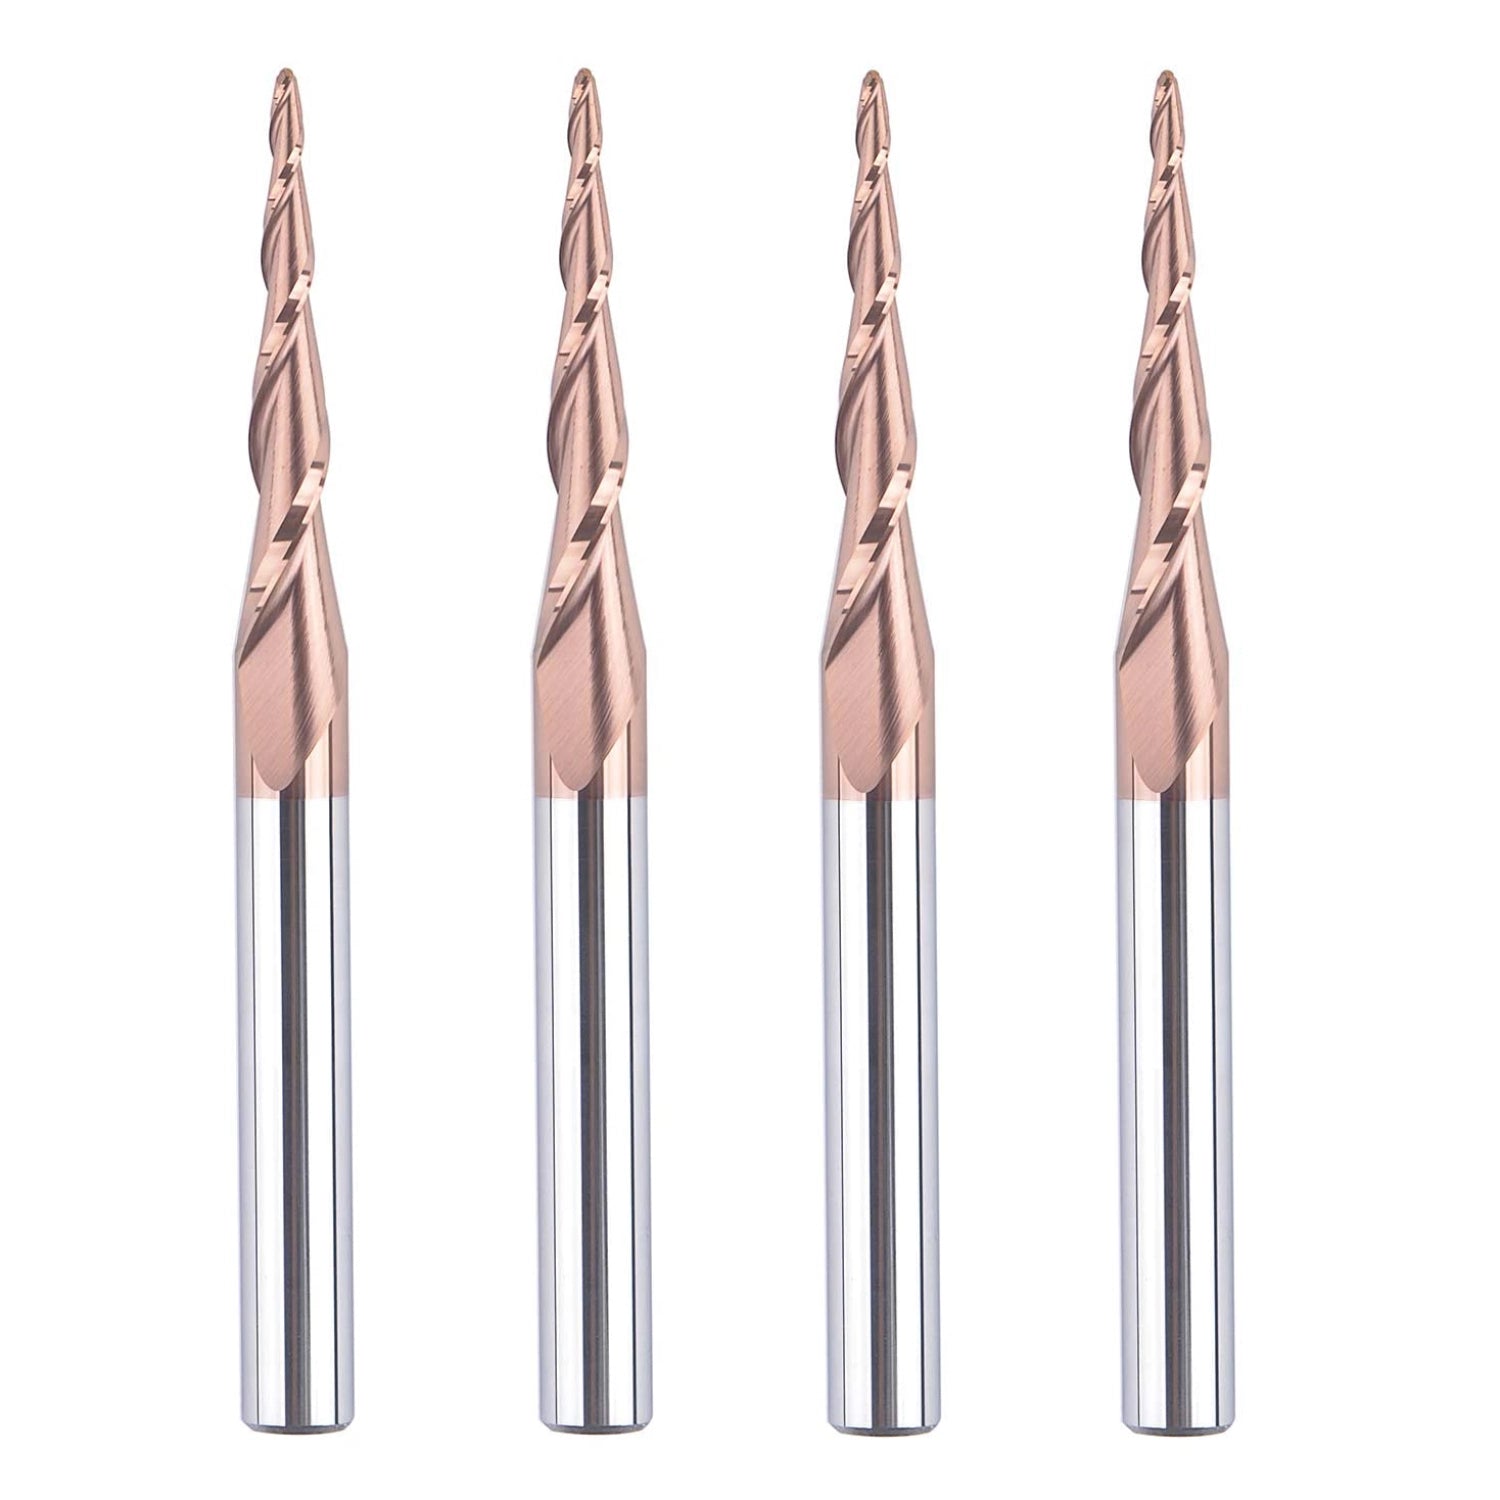 SpeTool W01009 CNC 2D and 3D Carving 4.36 Deg Tapered Angle Ball Nose 0.75mm Radius x 1/4" Shank x 1-1/4" Cutting Length x 3" Long 2 Flute SC H-Si Coated Upcut Router Bit